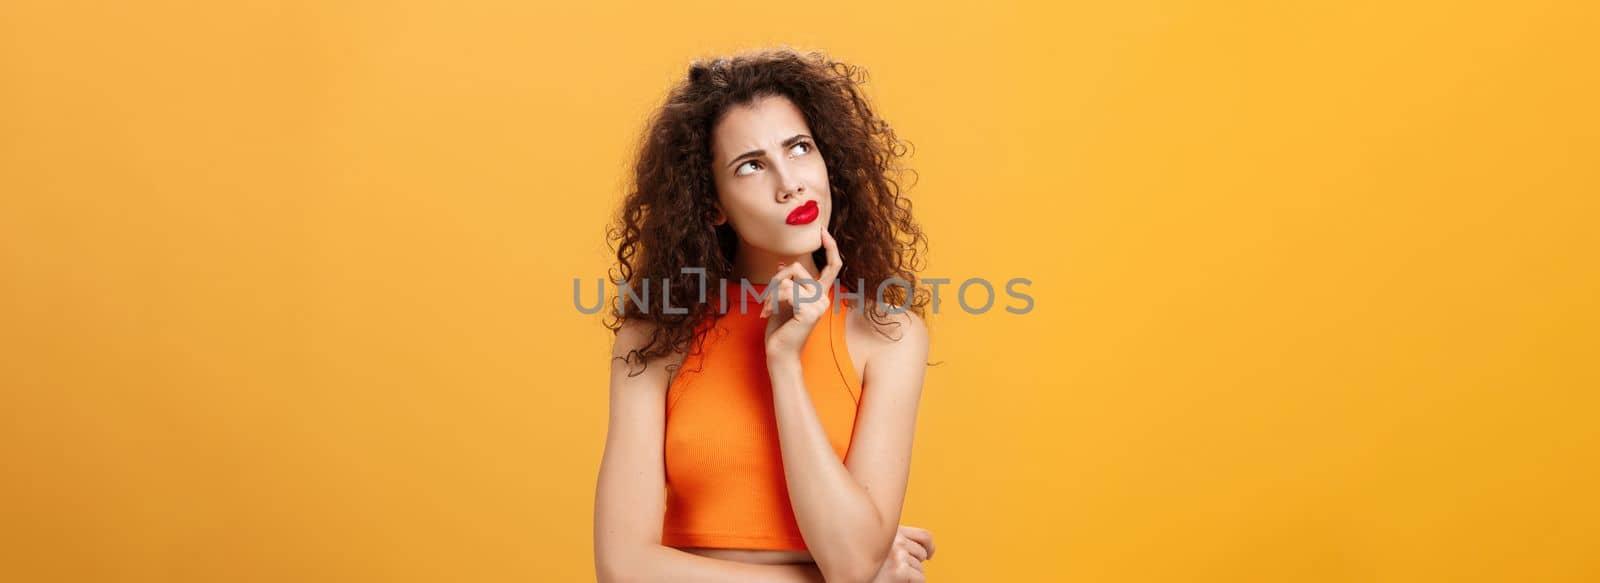 Waist-up shot of perplexed thoughtful. and smart female with curly hairstyle in red lipstick and cropped top holding in hmm pose touching chin frowning looking at upper left corner thinking determined.